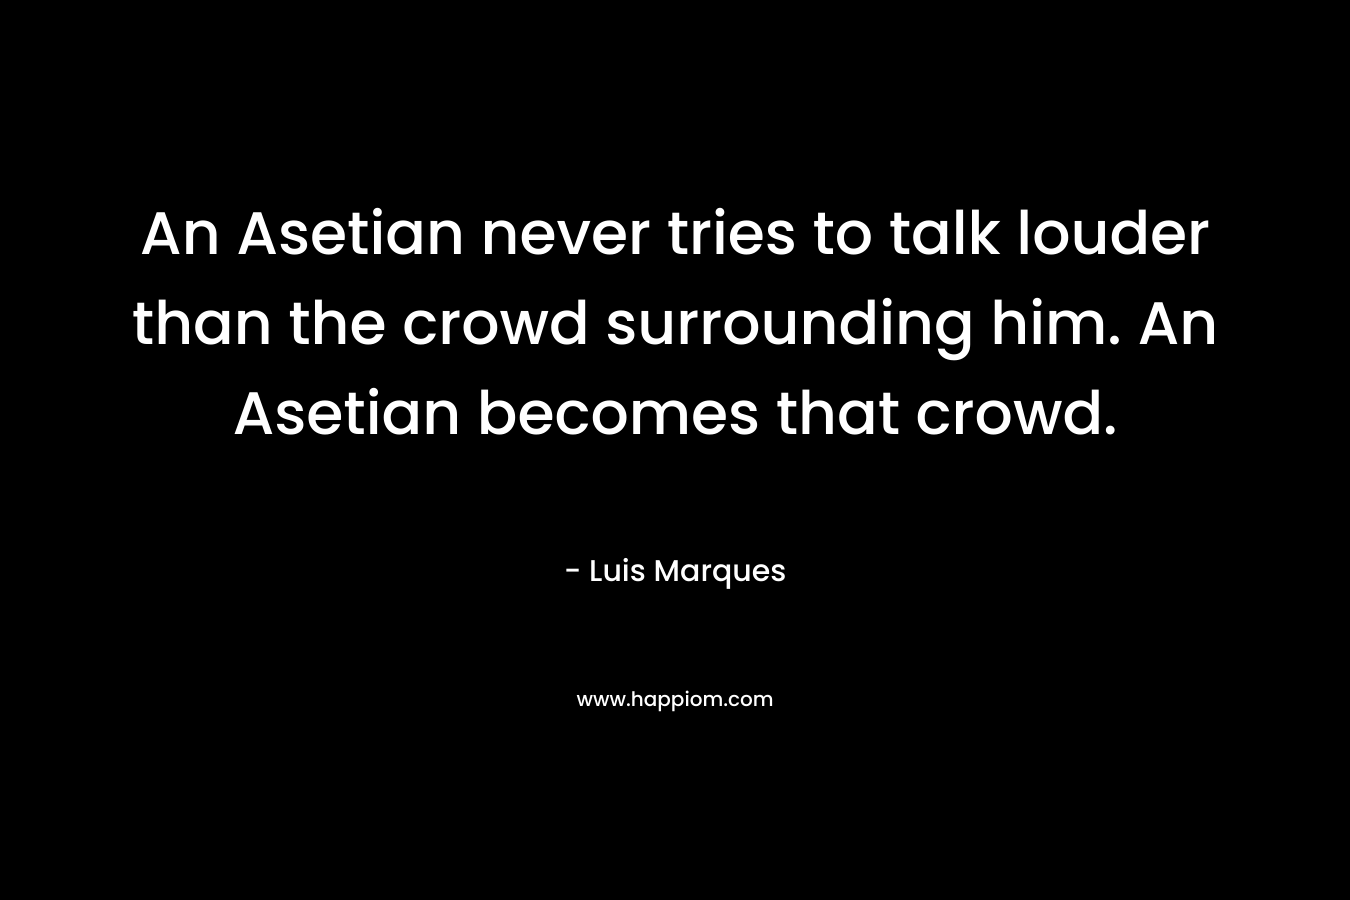 An Asetian never tries to talk louder than the crowd surrounding him. An Asetian becomes that crowd. – Luis Marques